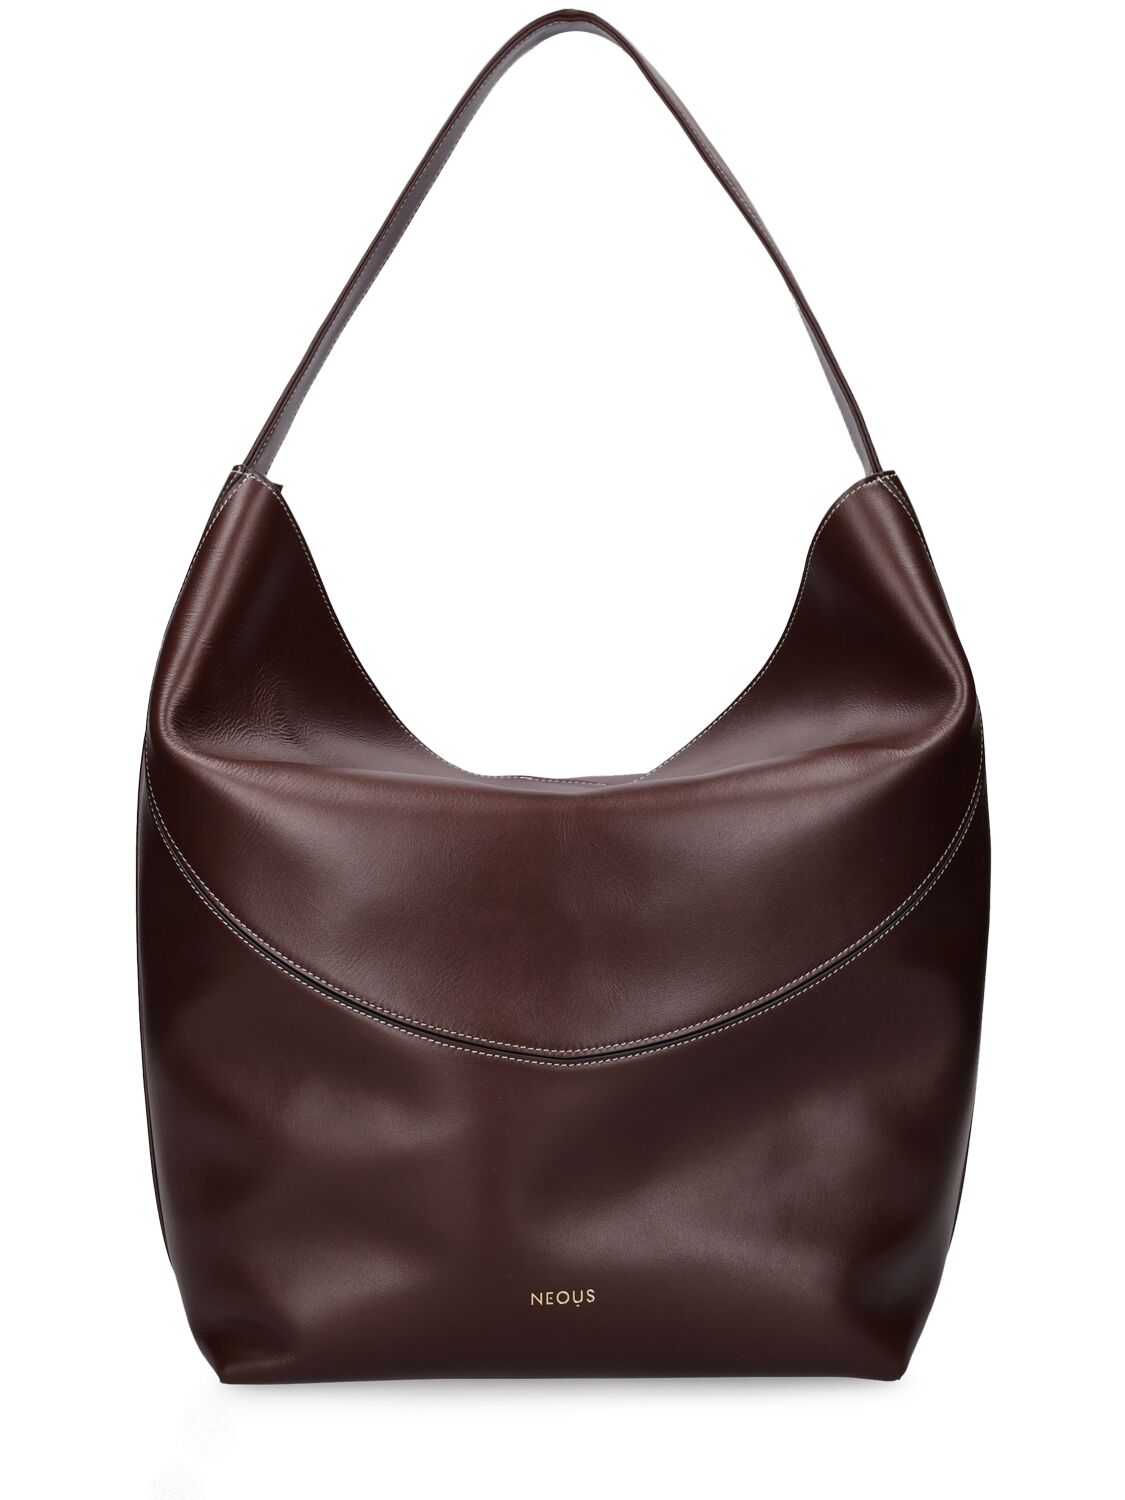 Neous Pavo Leather Tote Bag In Dark Chocolate